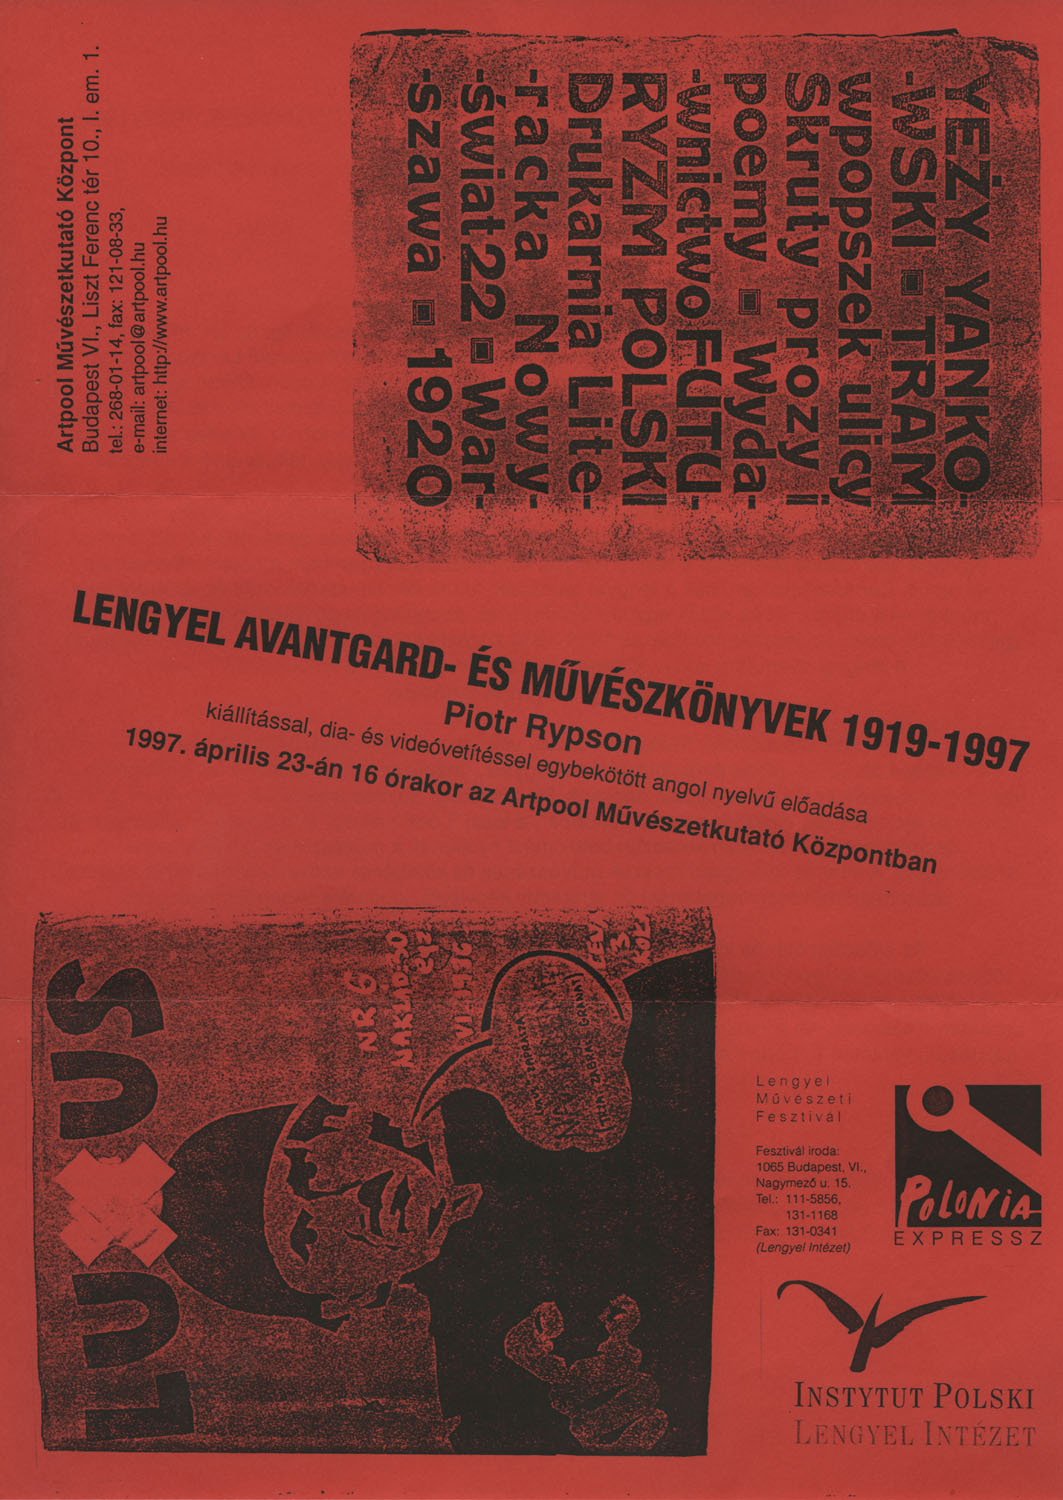 Invitation  for  Avantgarde and Artists' Books in Poland 1919-1997, lecture by Piotr Rypson (1st and 2nd page)